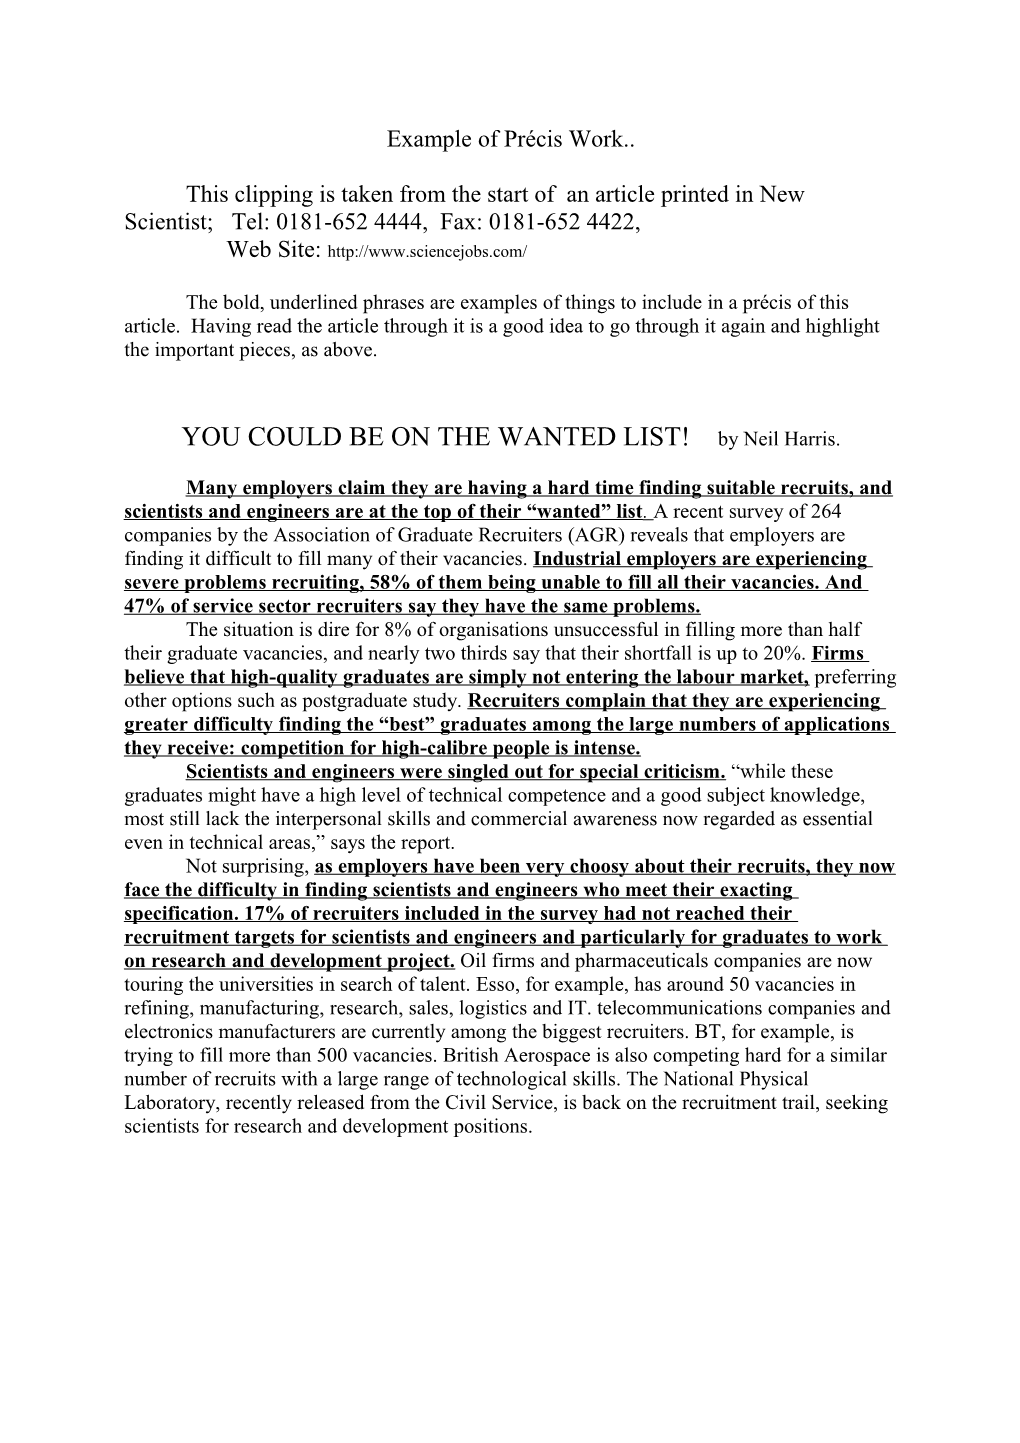 YOU COULD BE on the WANTED LIST! by Neil Harris